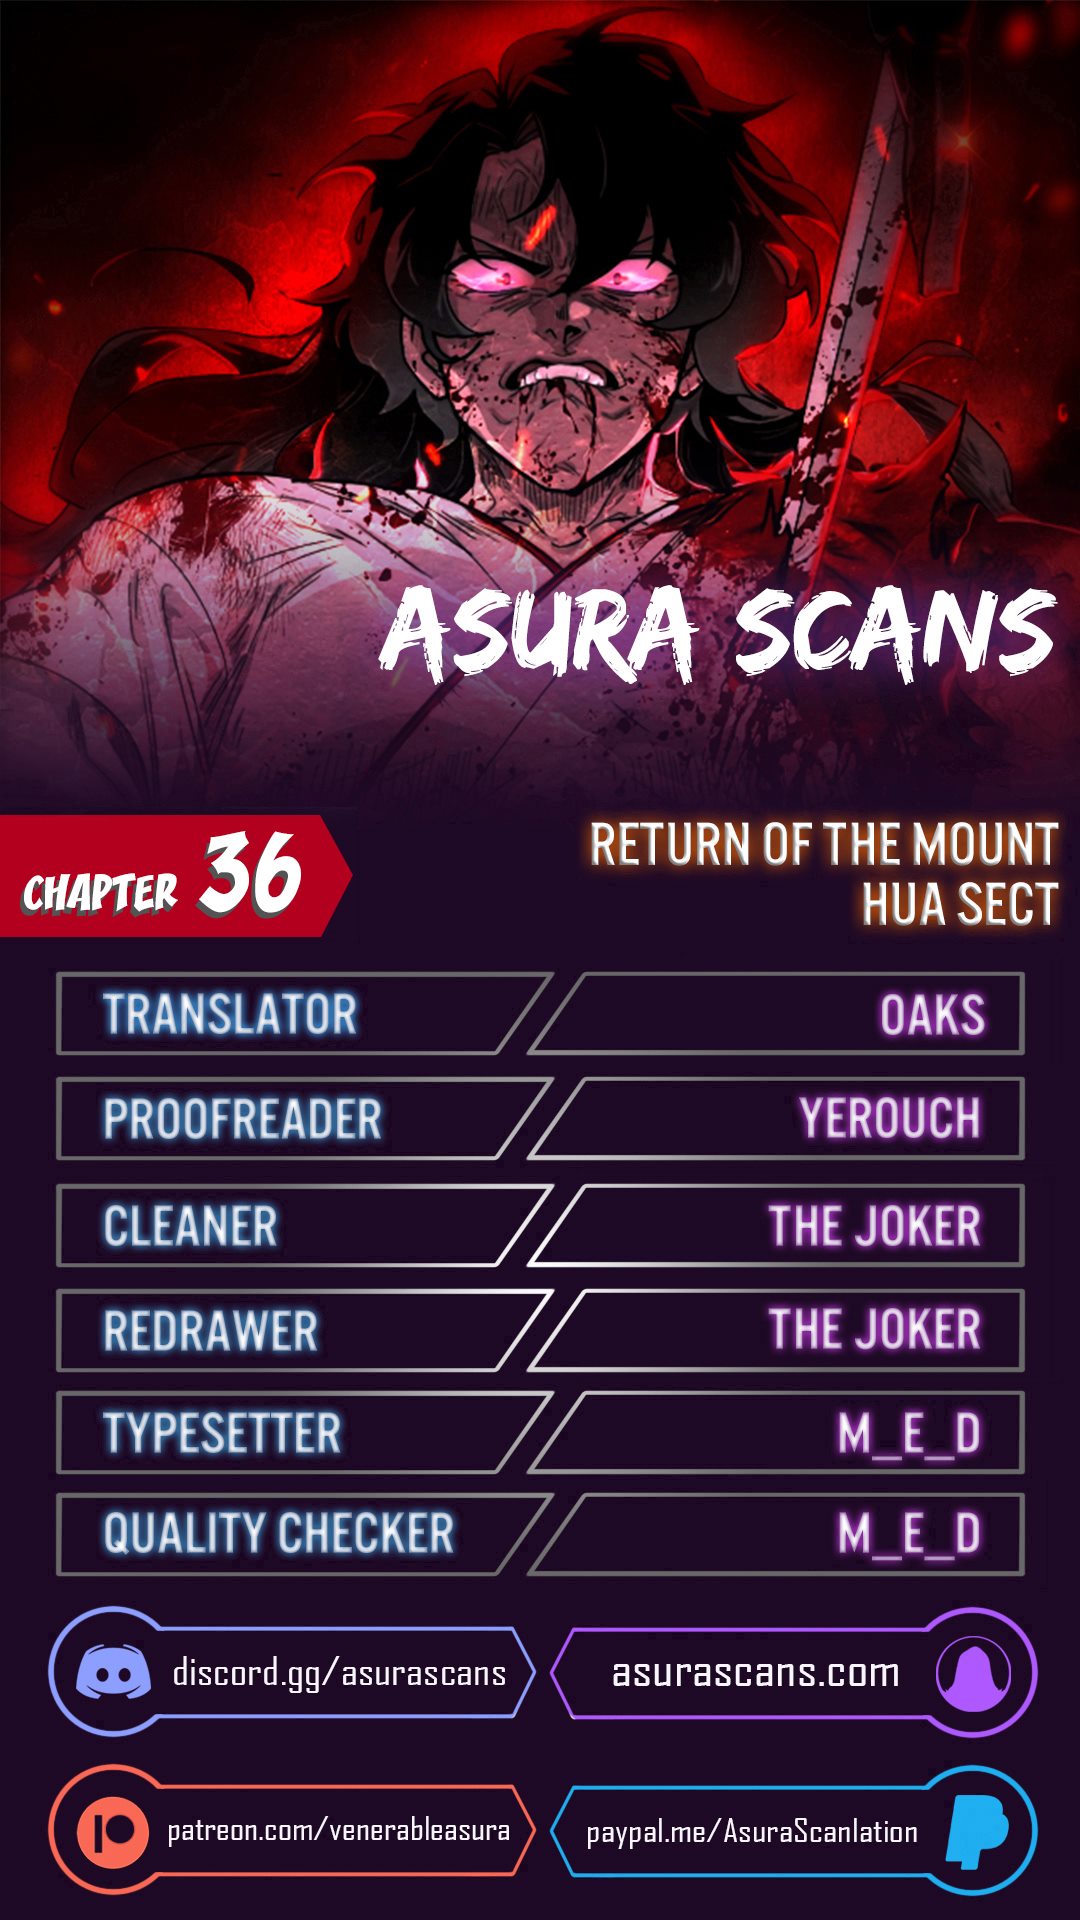 Return of the Mount Hua Sect - Chapter 11660 - Image 1